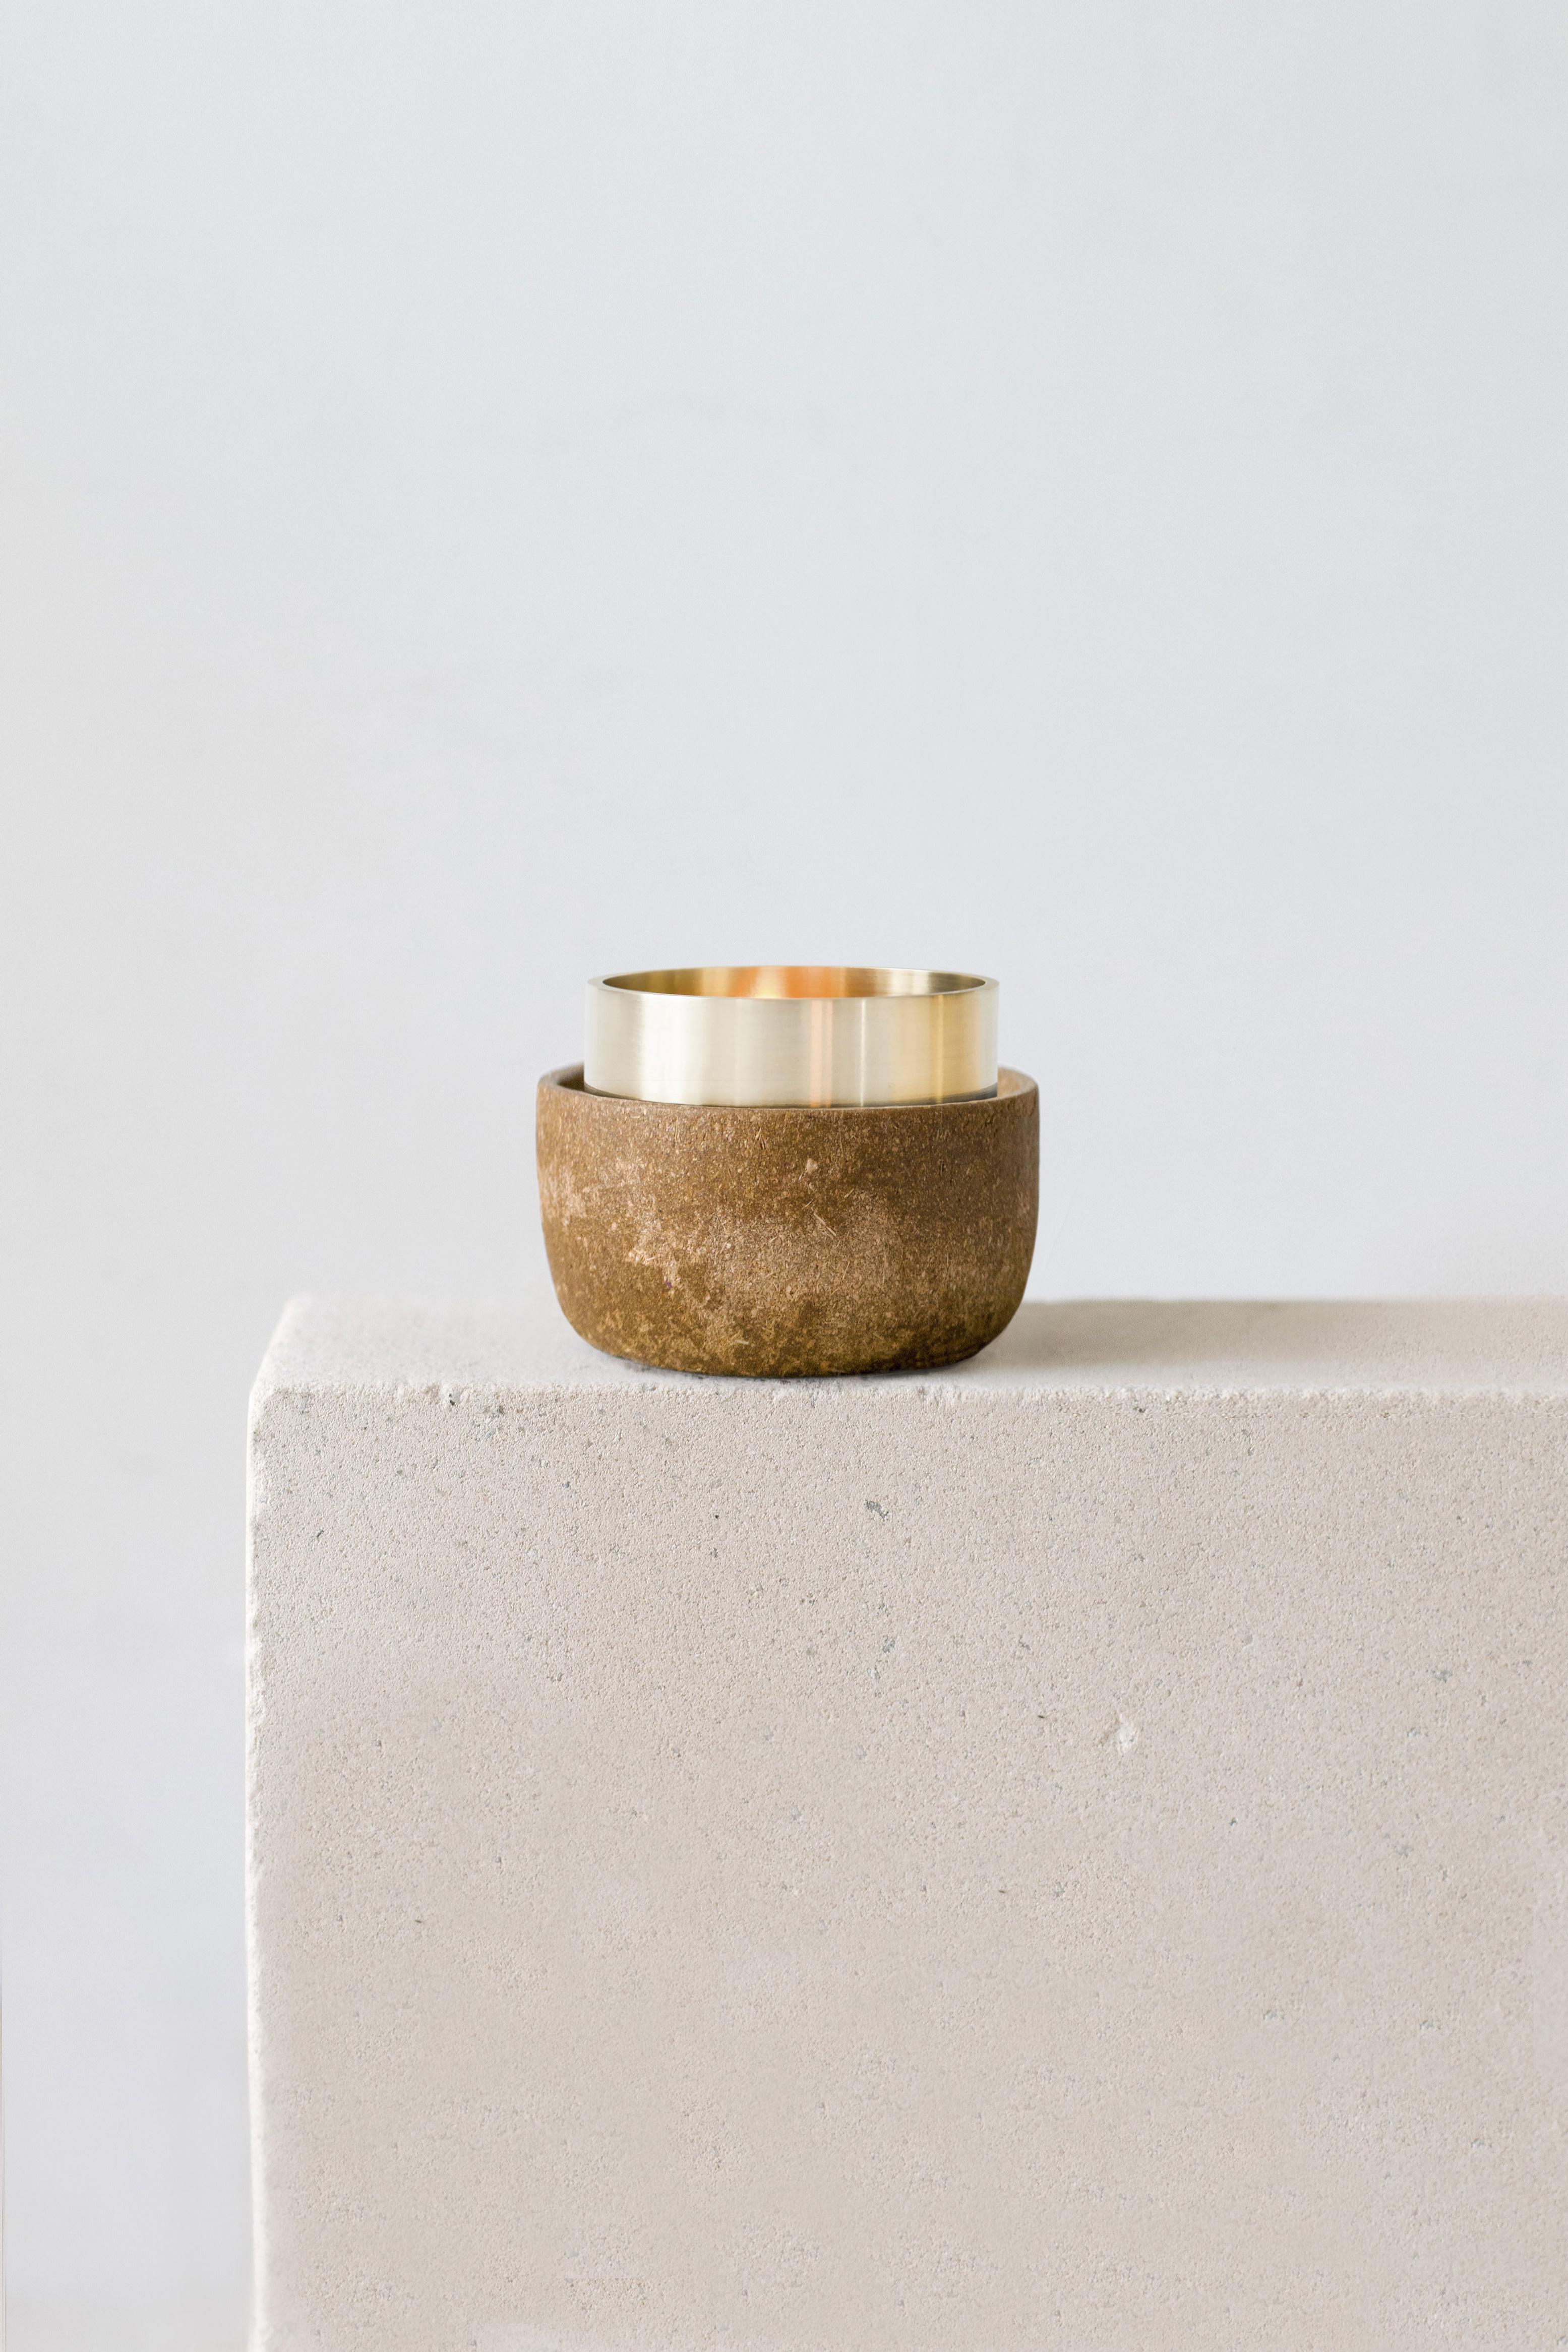 Ash candle holder by Evelina Kudabaite Studio
Handmade
Materials: ash, brass
Dimensions: H 55 mm x D 65 mm
Colour: yellow/light brown
Notes: for dry use

Since 2015, product designer Evelina Kudabaite keeps on developing and making GIRIA